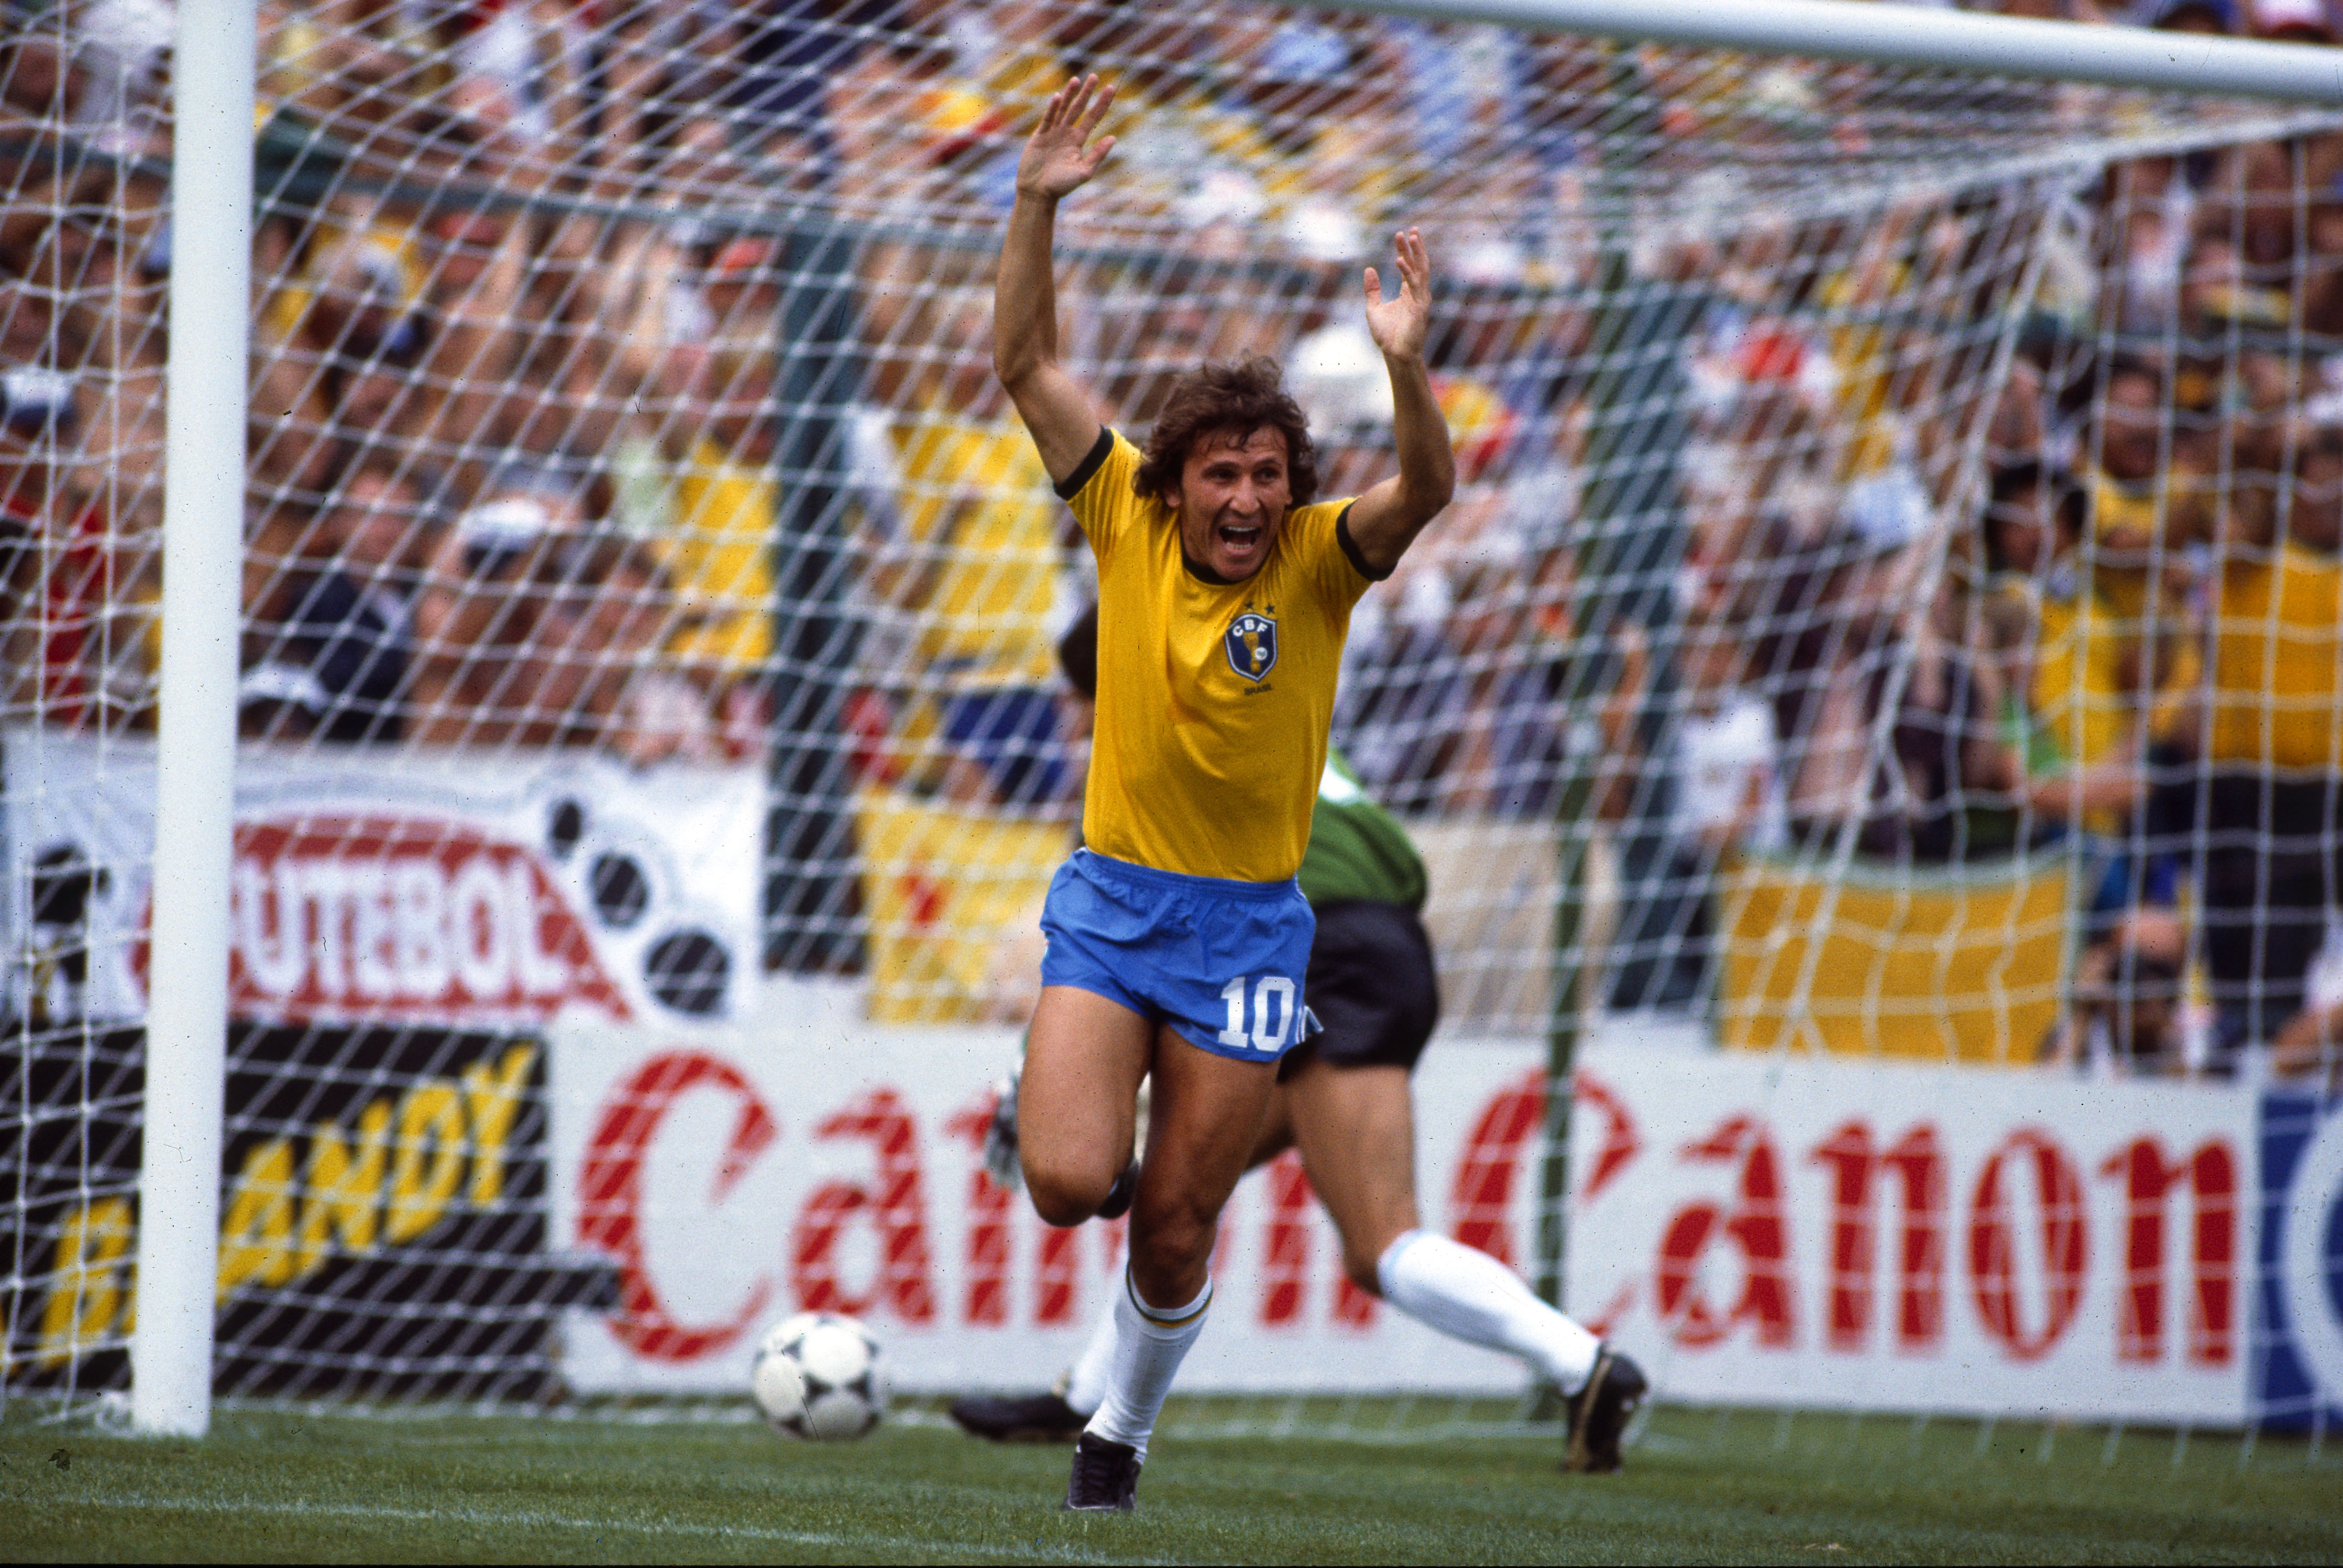 Zico is another of the all-time Brazilian greats who captured the imagination